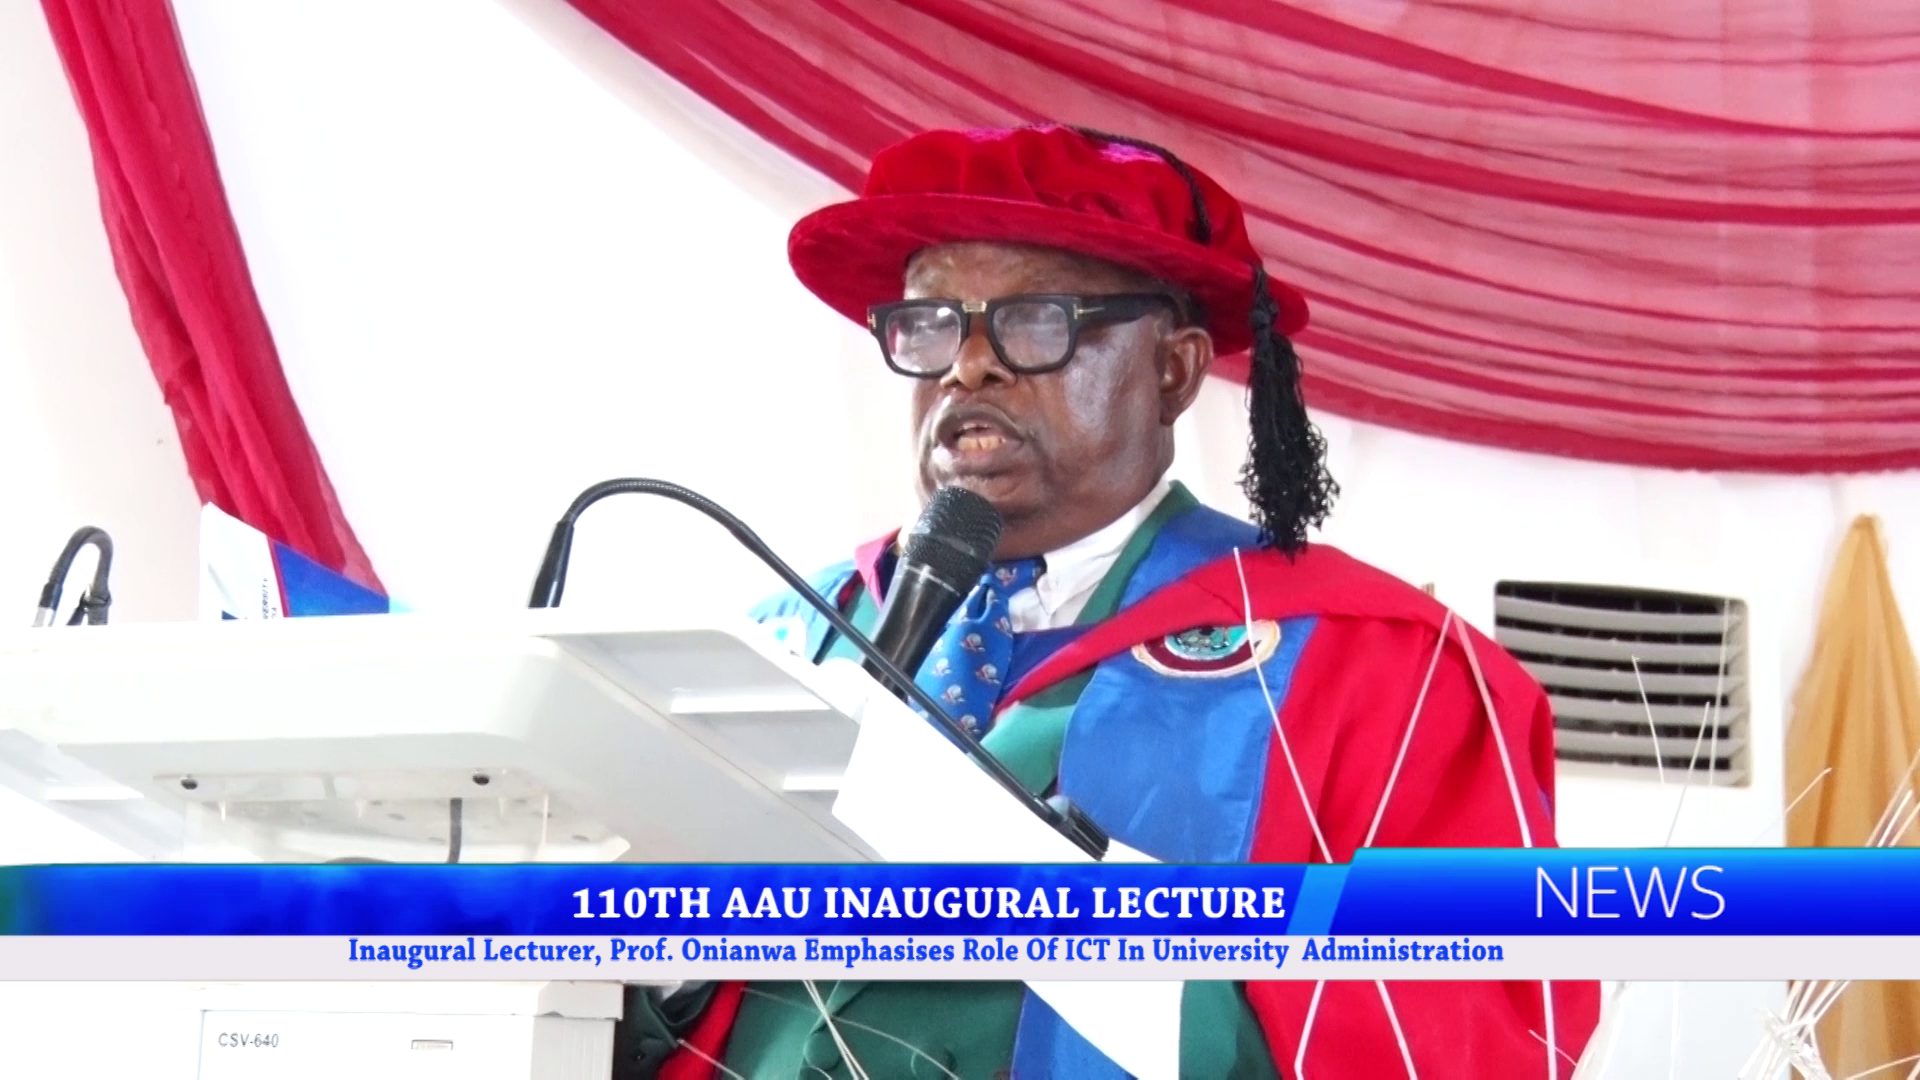 Inaugural Lecturer, Prof. Onianwa Emphasises Role Of ICT In University Administration